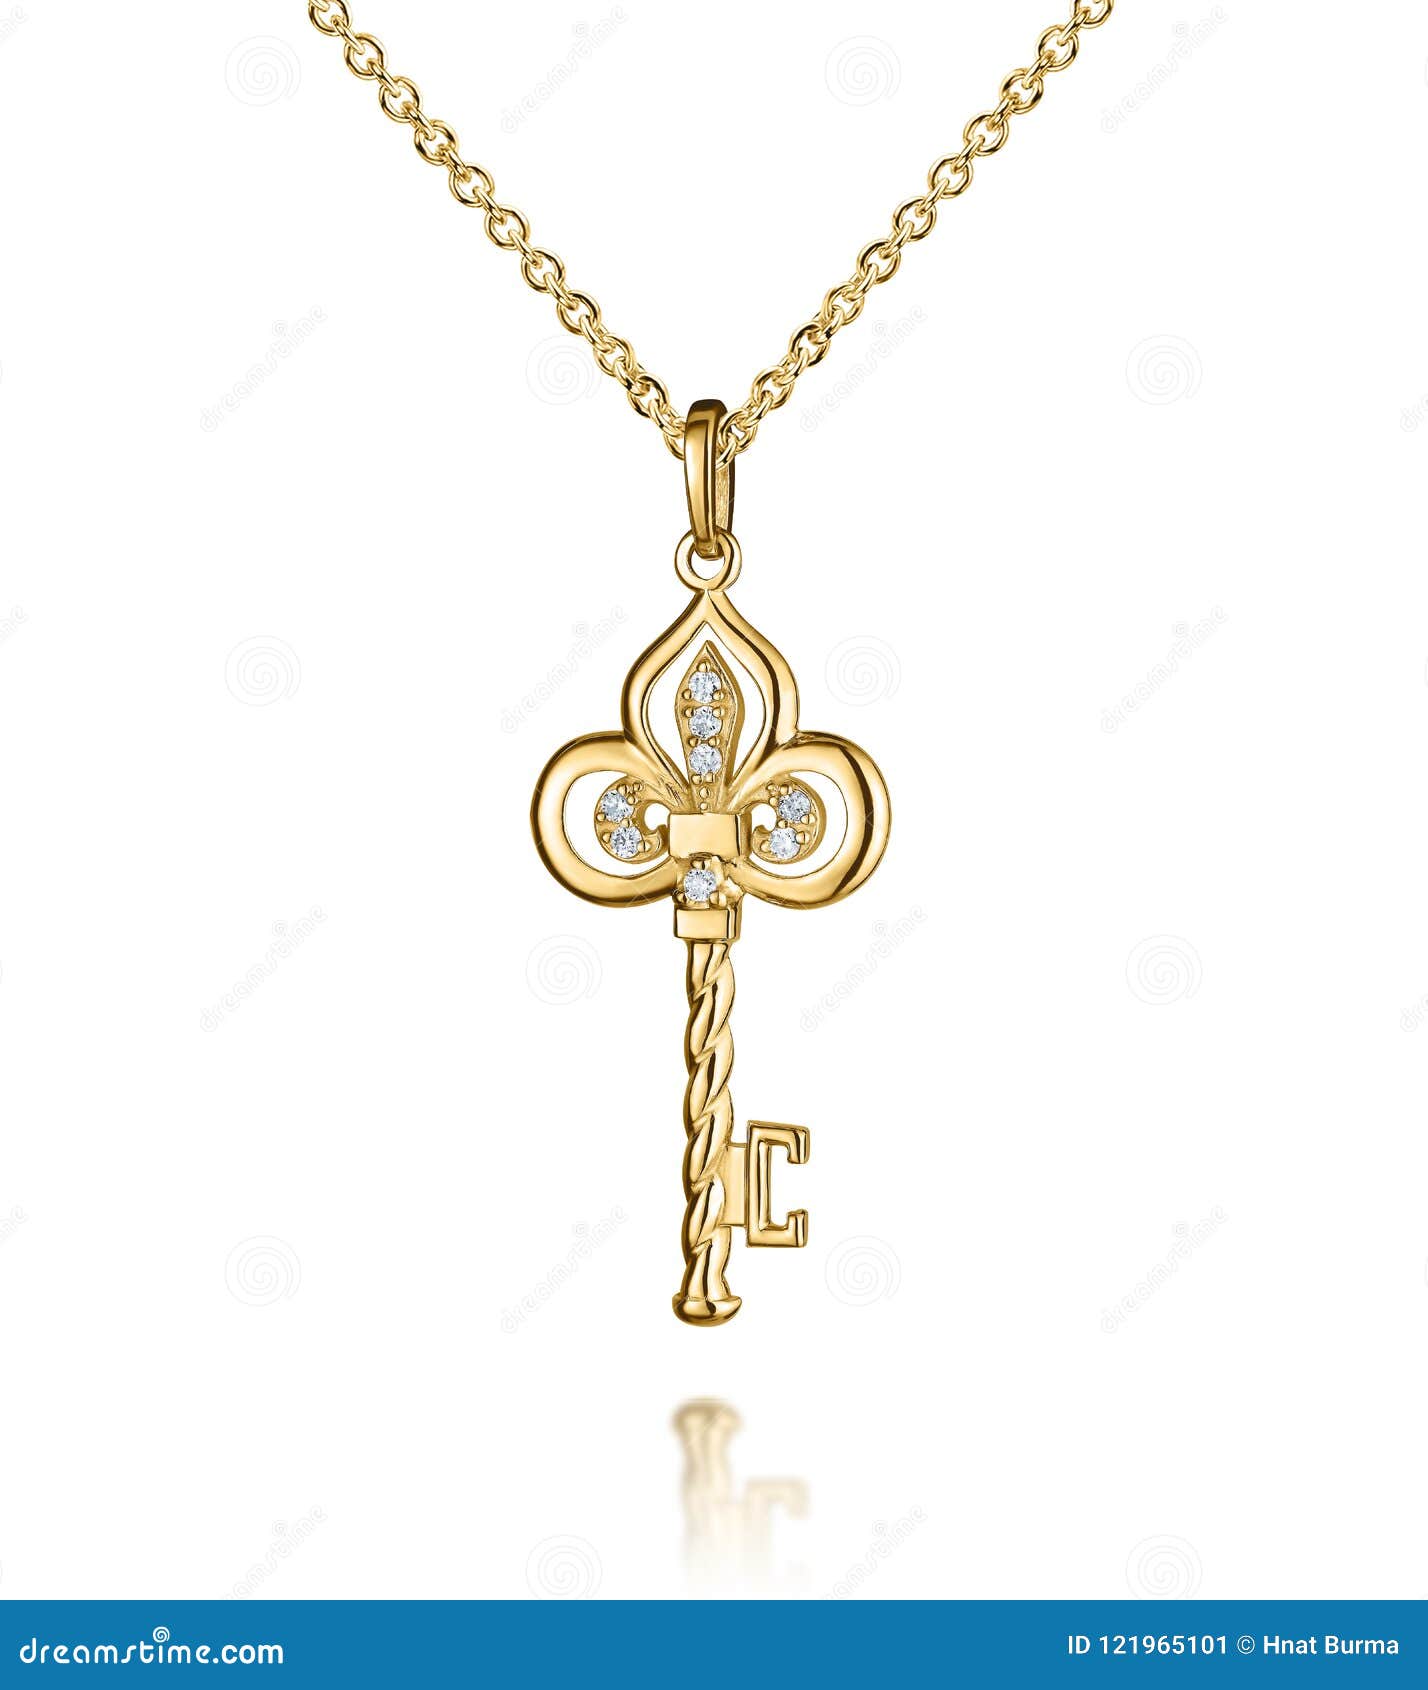 Jewelry Golden Pendant with Diamonds, Key, Golden Chain, Yellow Gold